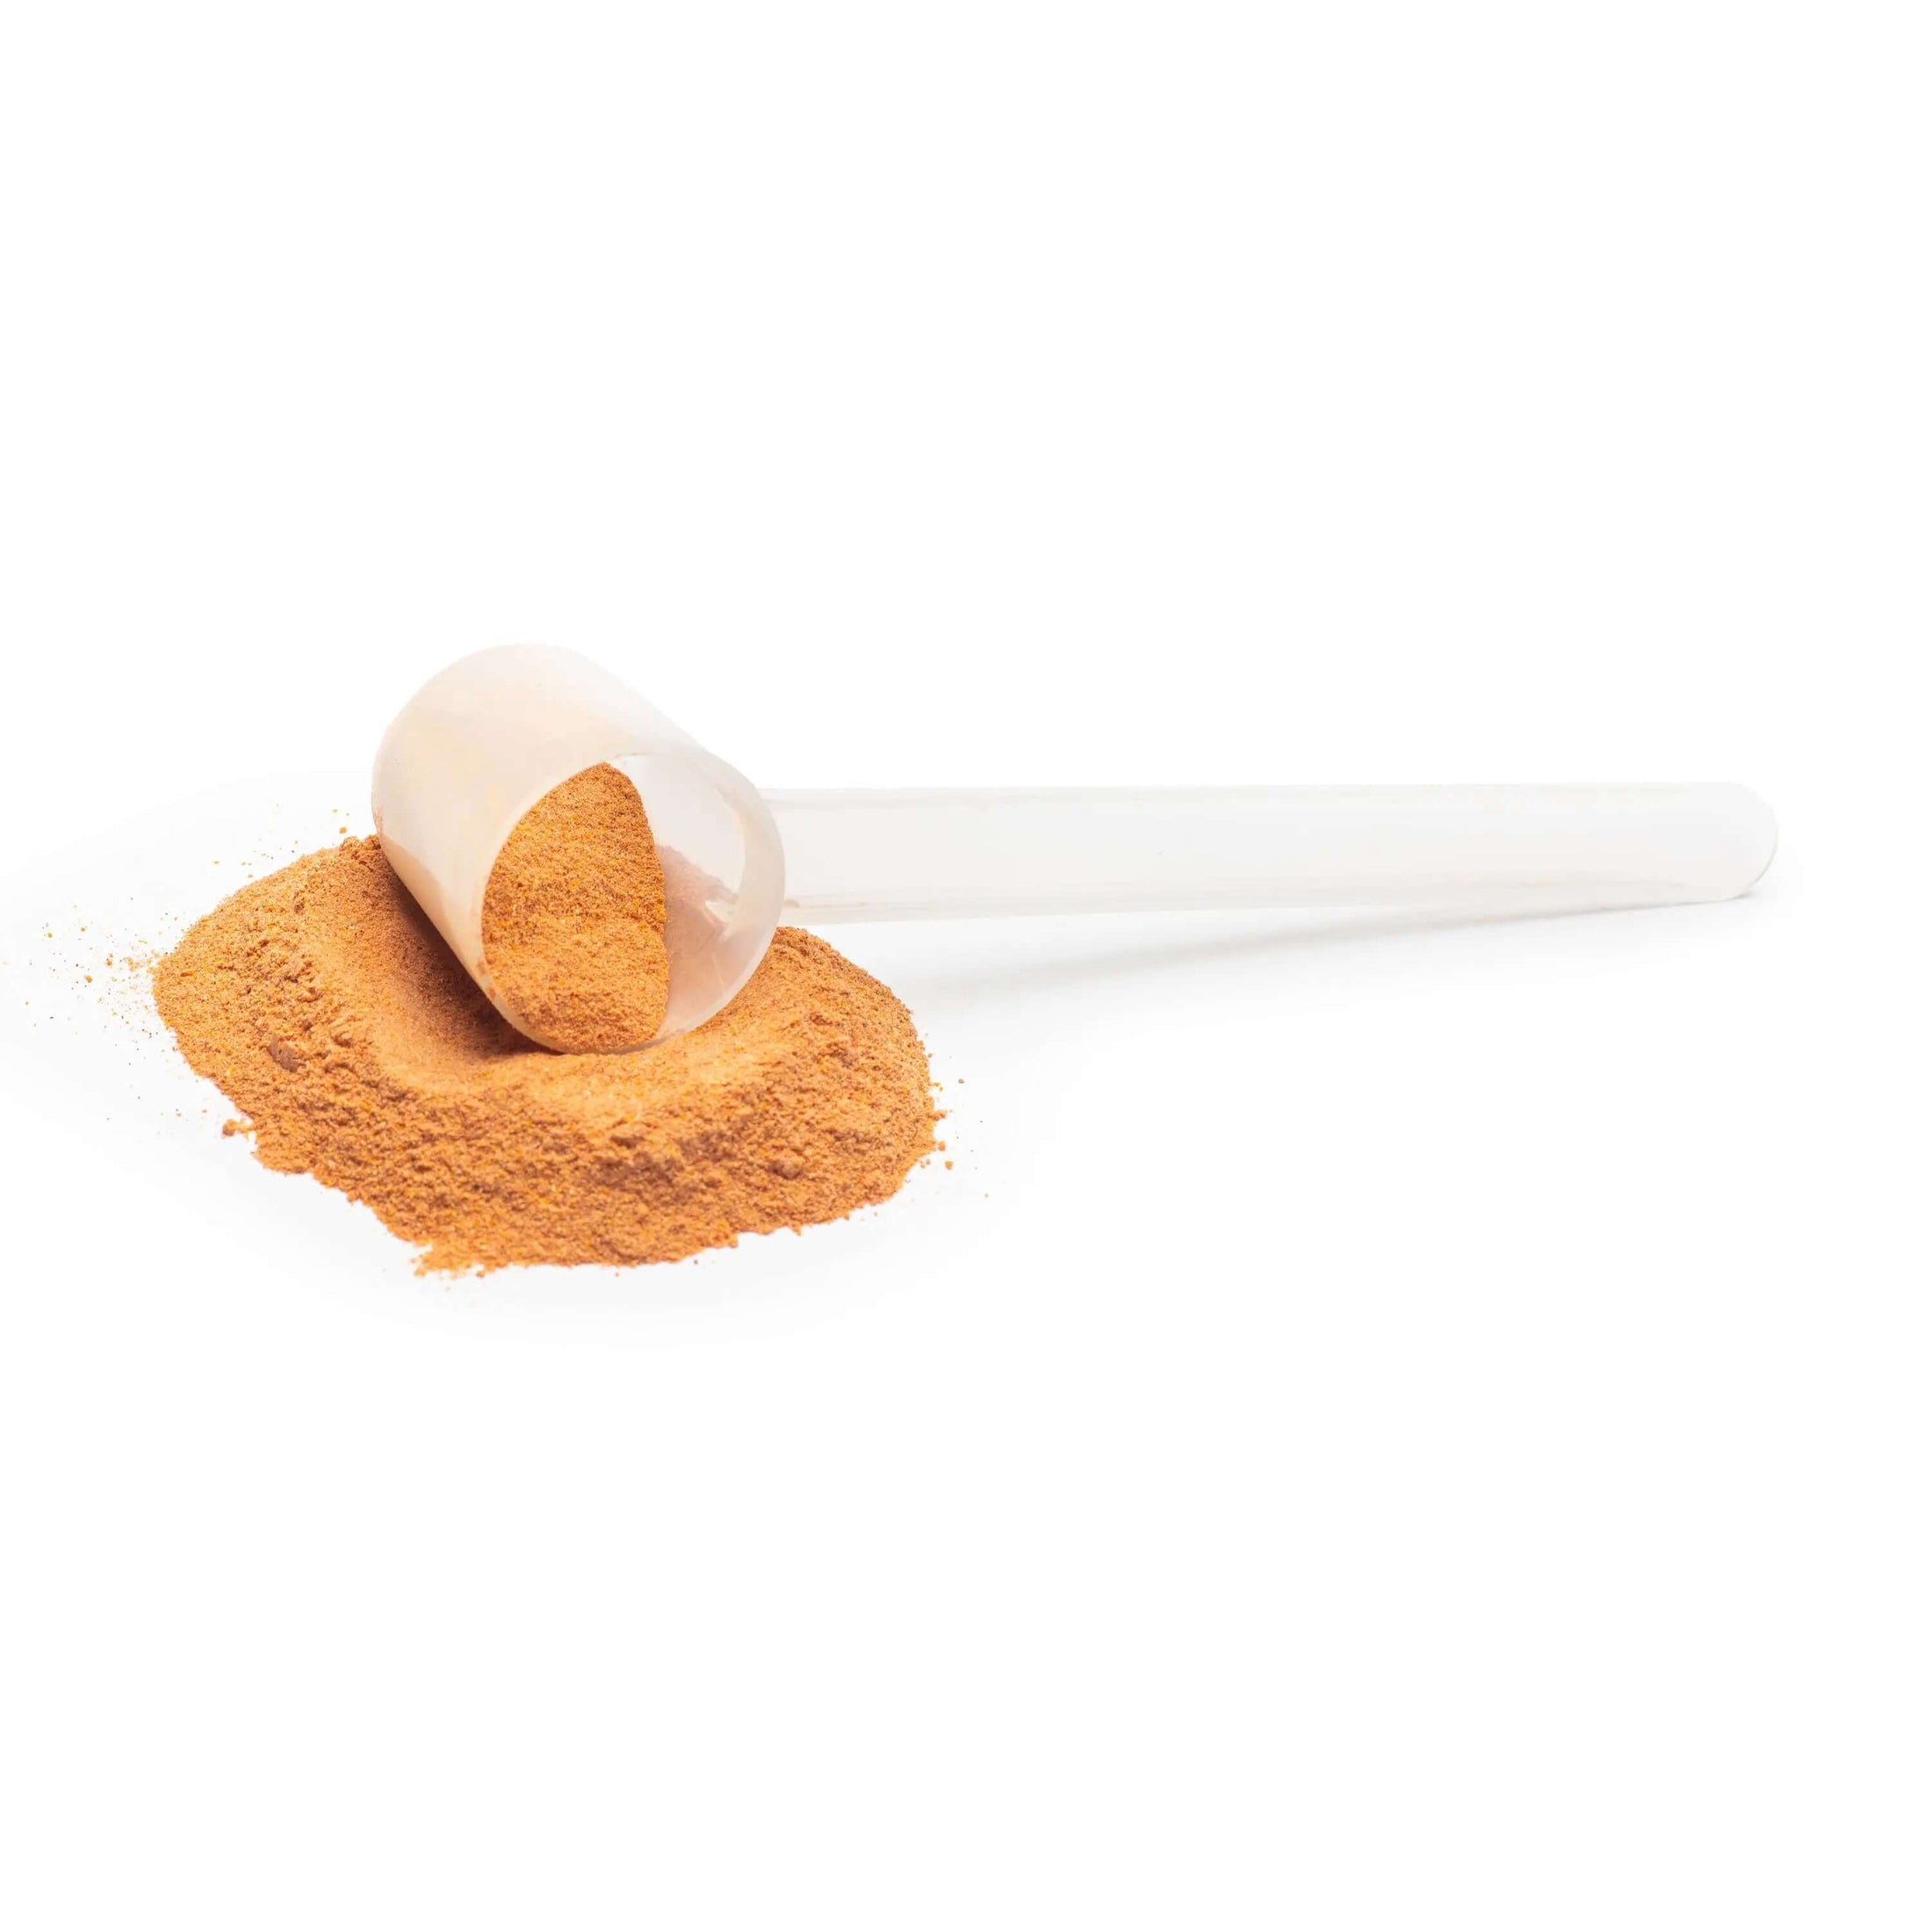 A metal scoop filled with Reddy Red Organic Superfood Powder, showcasing the powder's uniform consistency and deep red hue, ready to be added to a smoothie or meal.